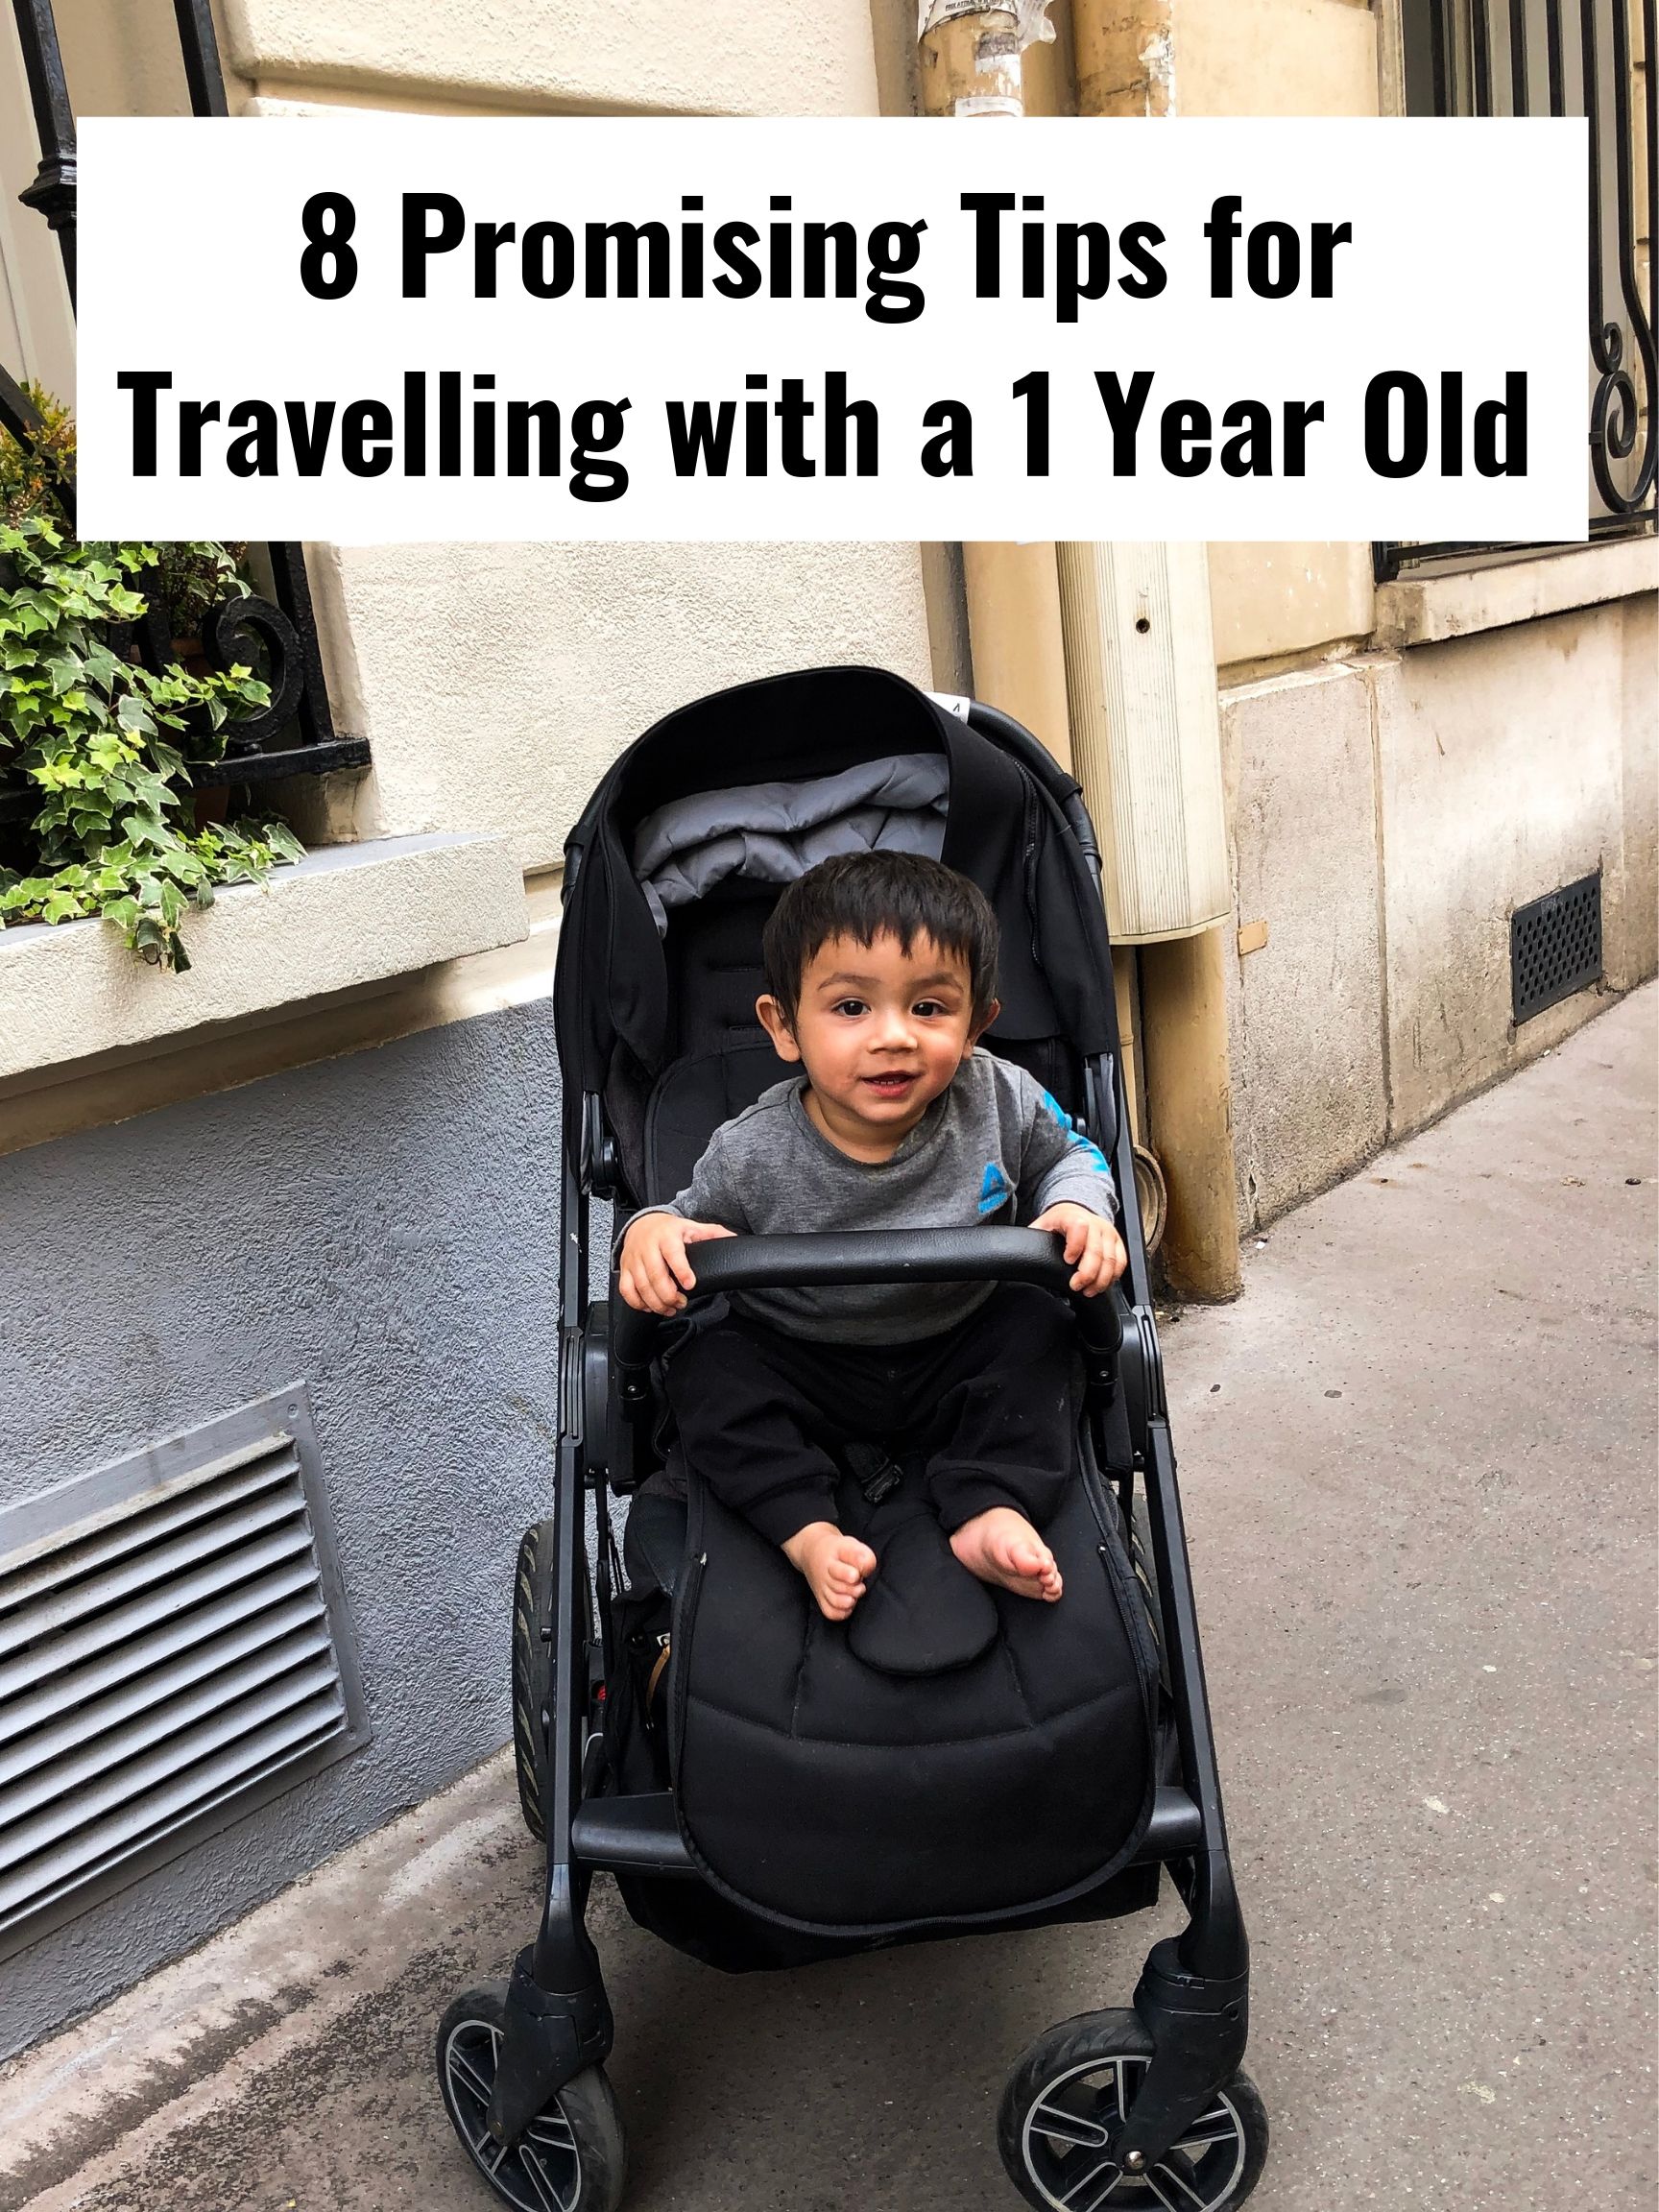 8 promising tips for travelling with a 1 year old baby infant children flights motherhood travel travelling europe kids 5